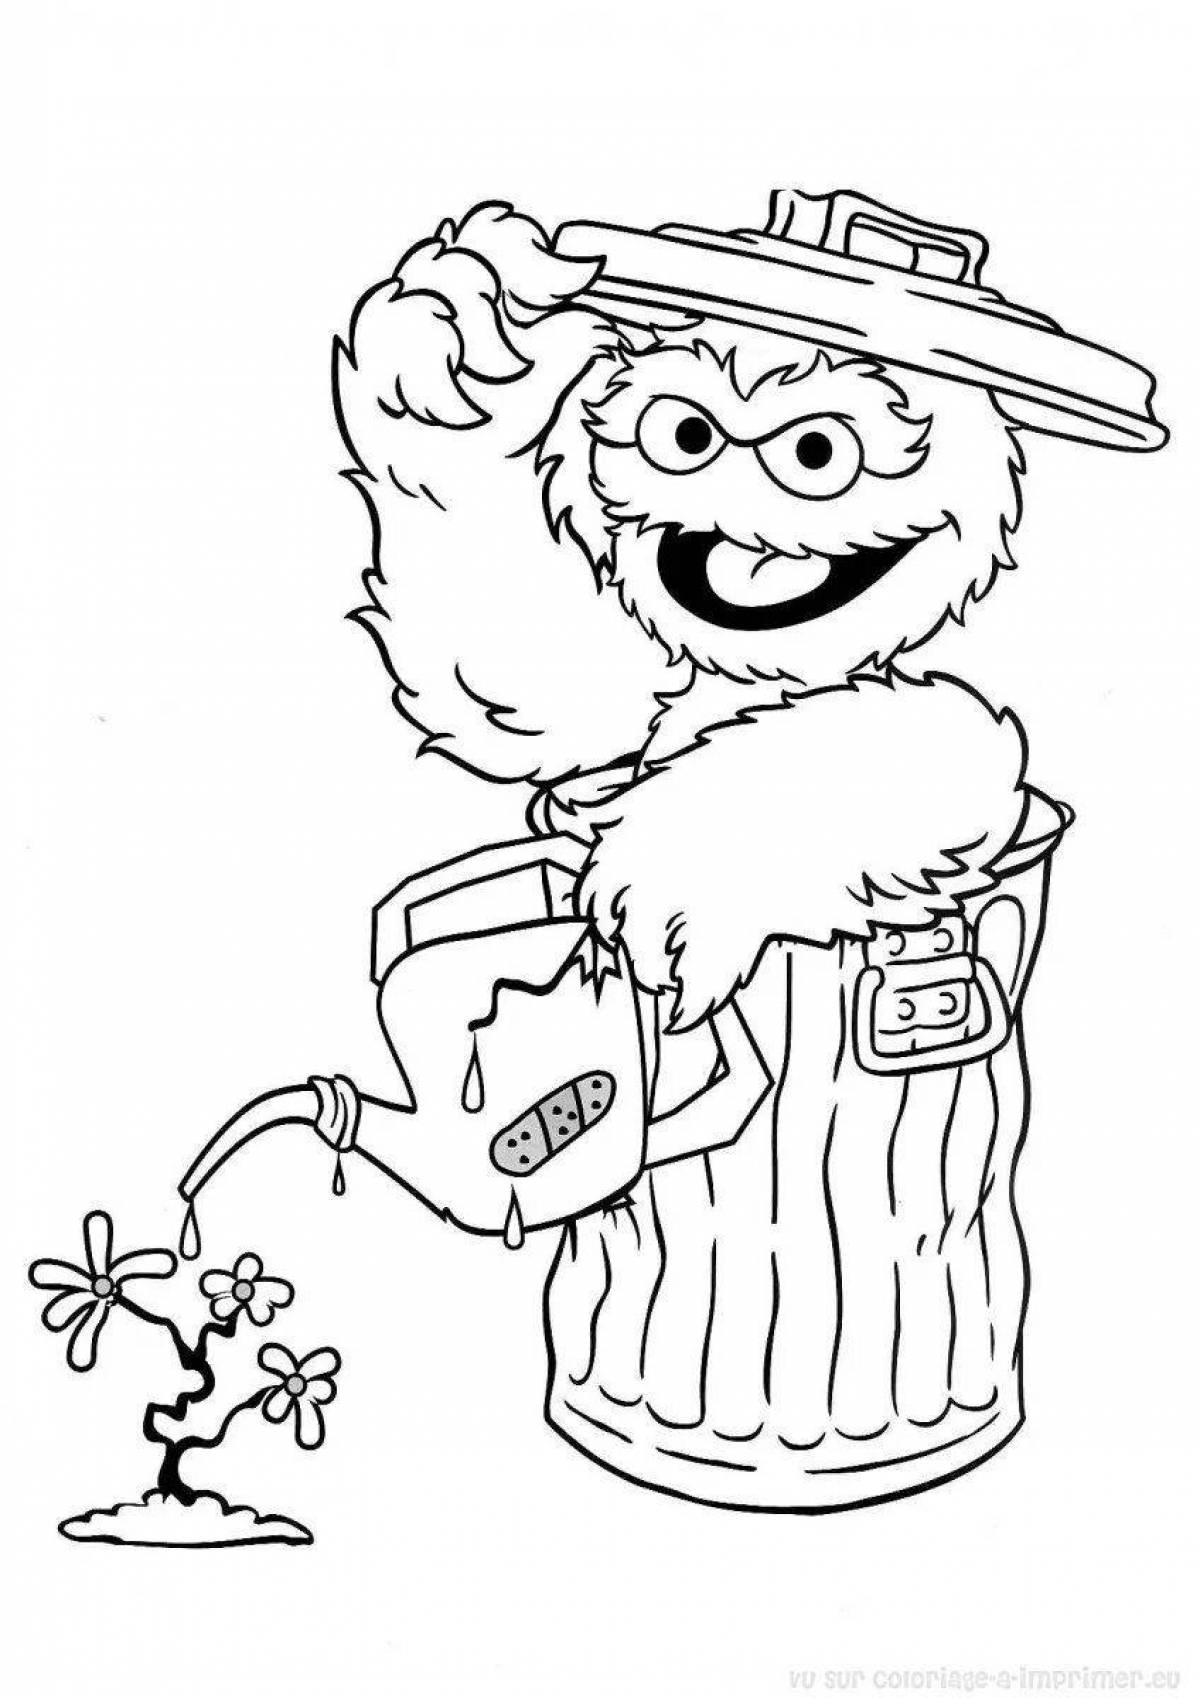 Adorable Sesame Street Coloring Page